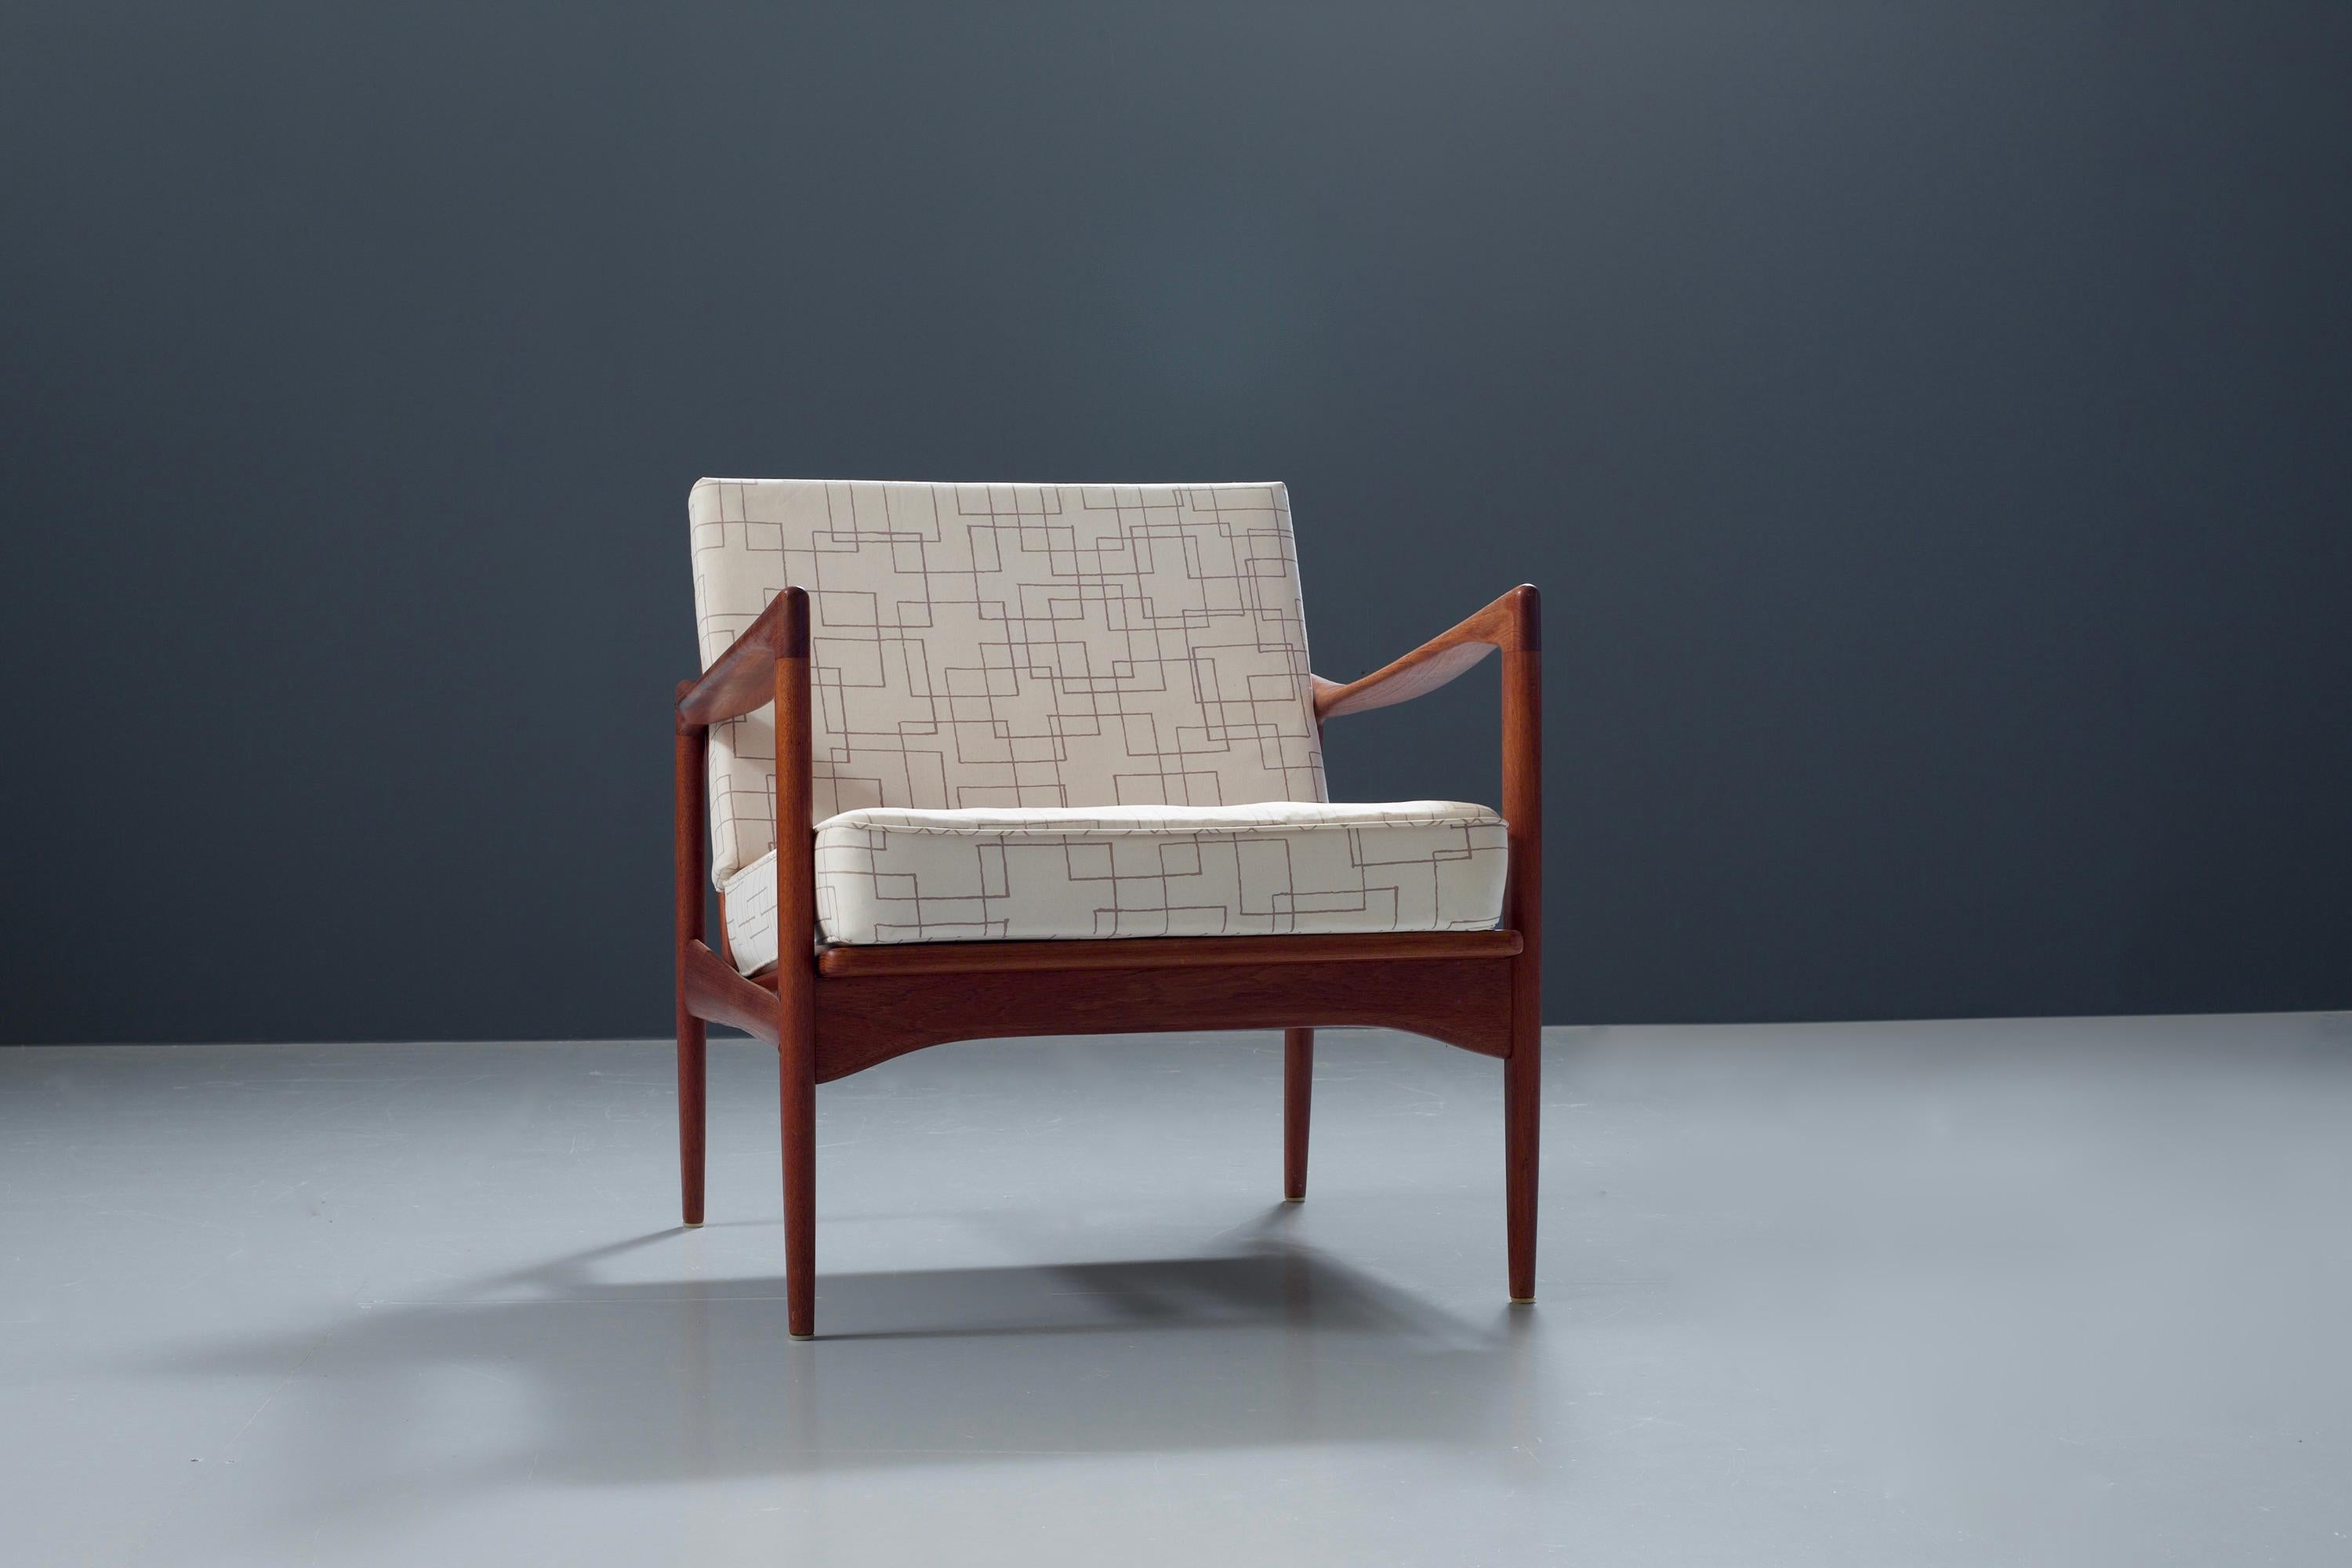 'Kandidaten' chair by Ib Kofod-Larsen in well preserved teak that has colored into nice dark brown over the years. Very typical for the work of Larsen are the shapes of the armrests that you also see back in different models such as the Elisabeth